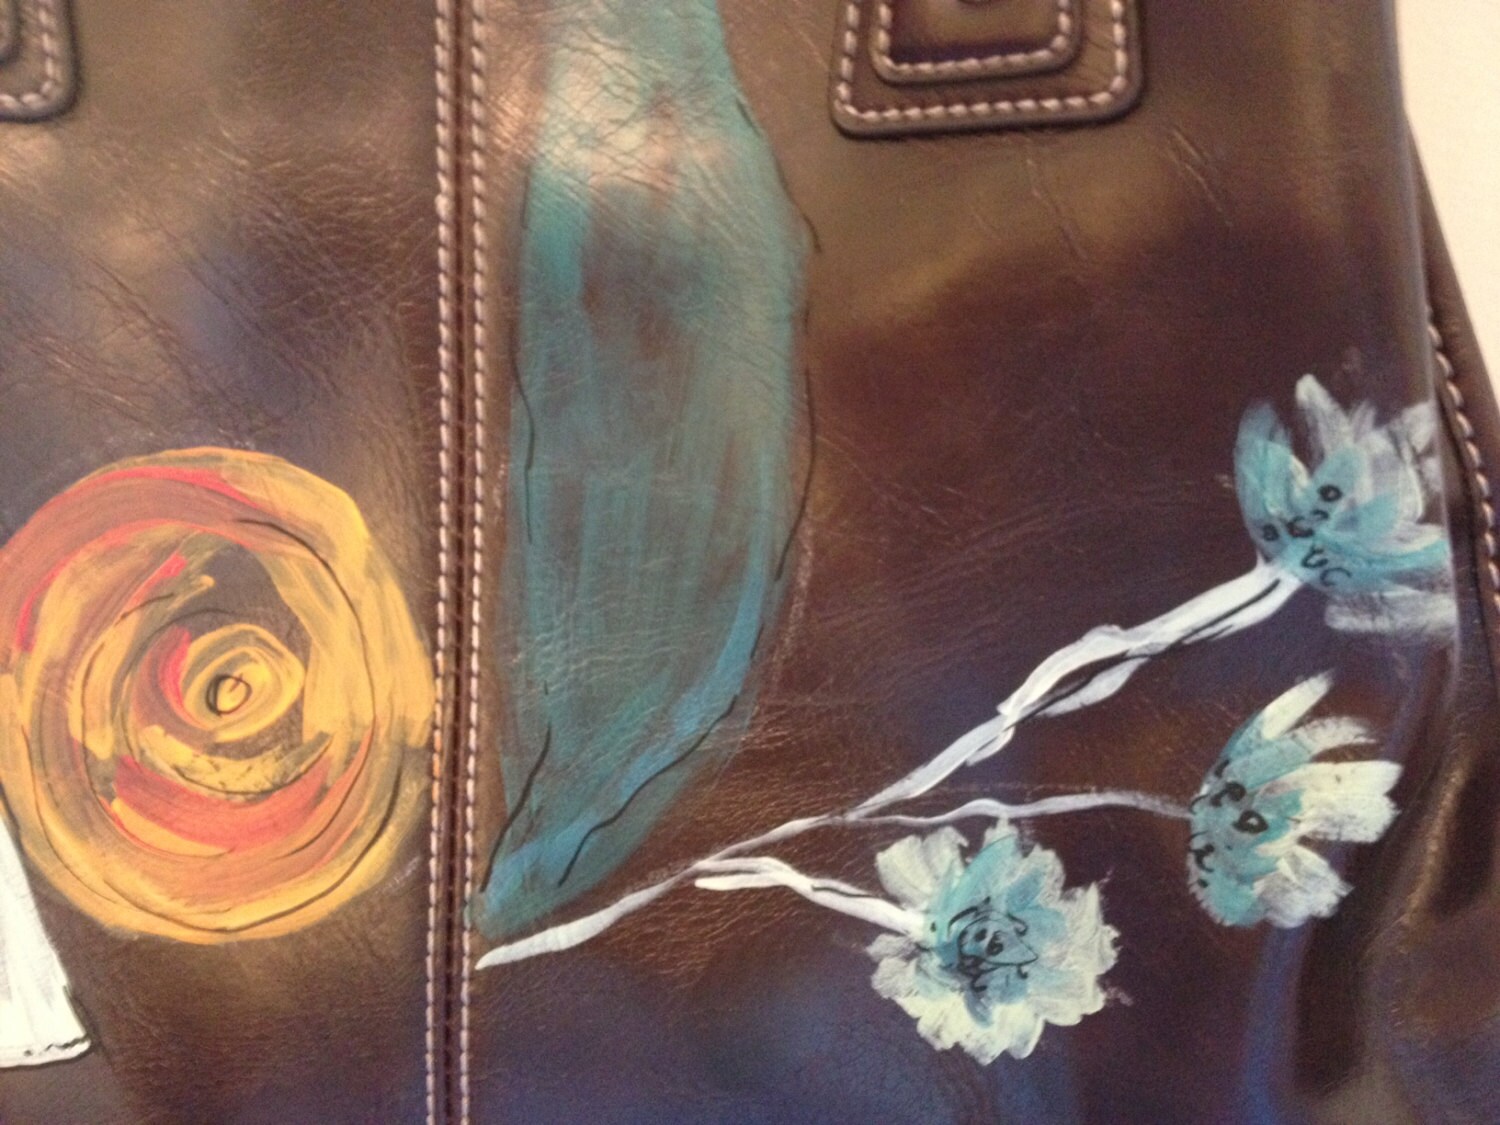 Personalizar Art Hand Painted Flowers Bags Cowhide Togo Leather